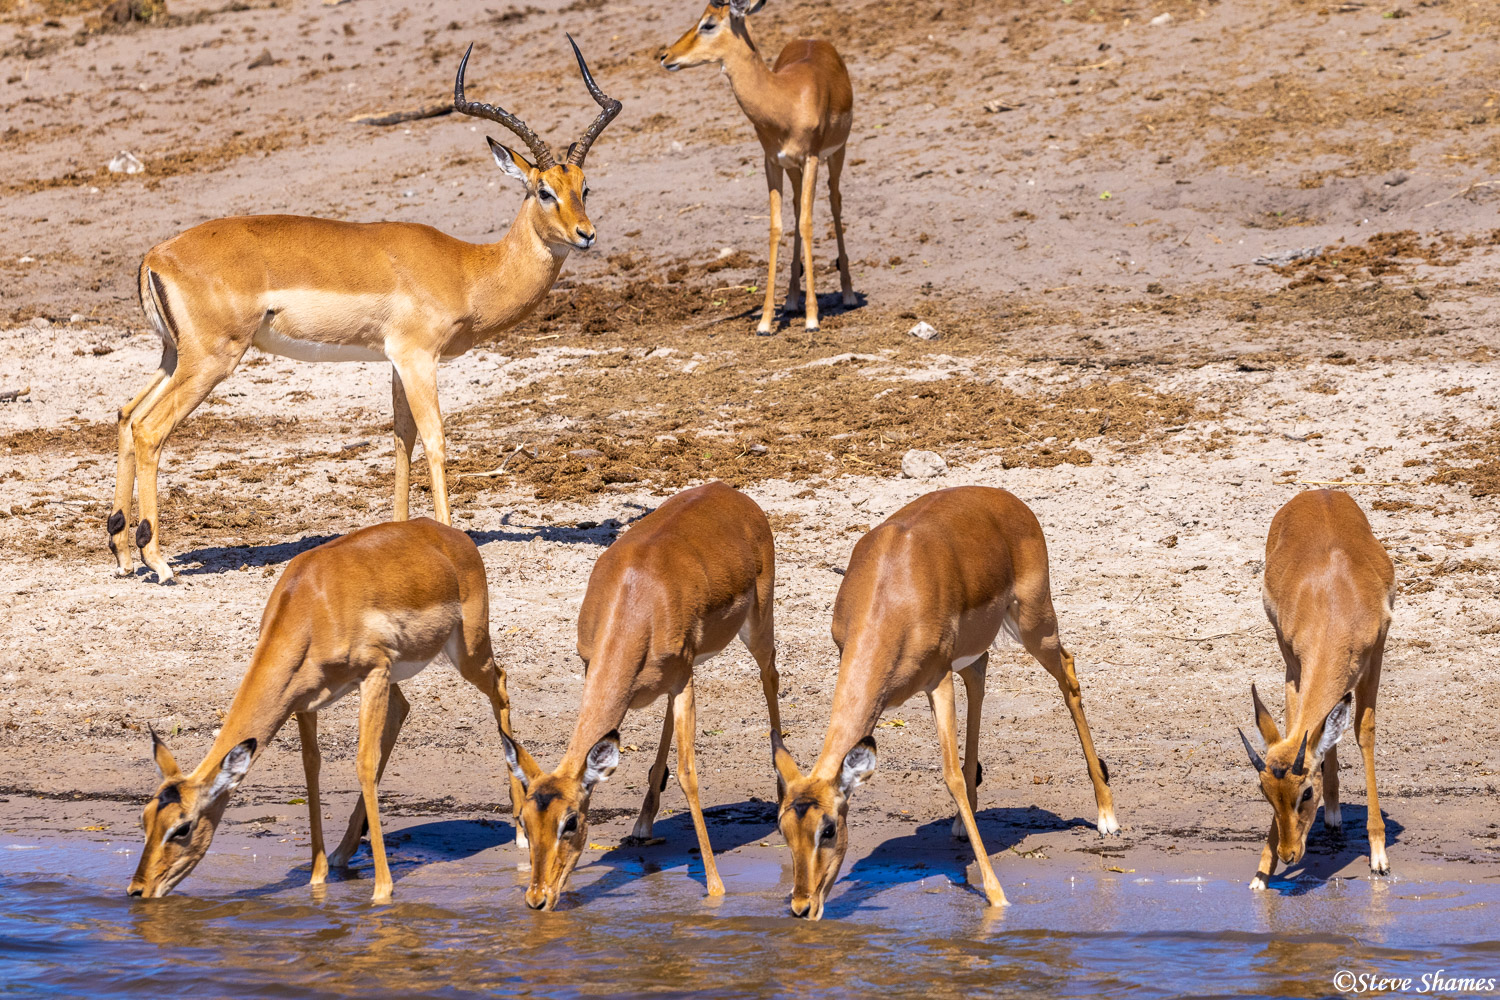 A male impala keeping his eye on the ladies, as they get a drink at the Chobe River.